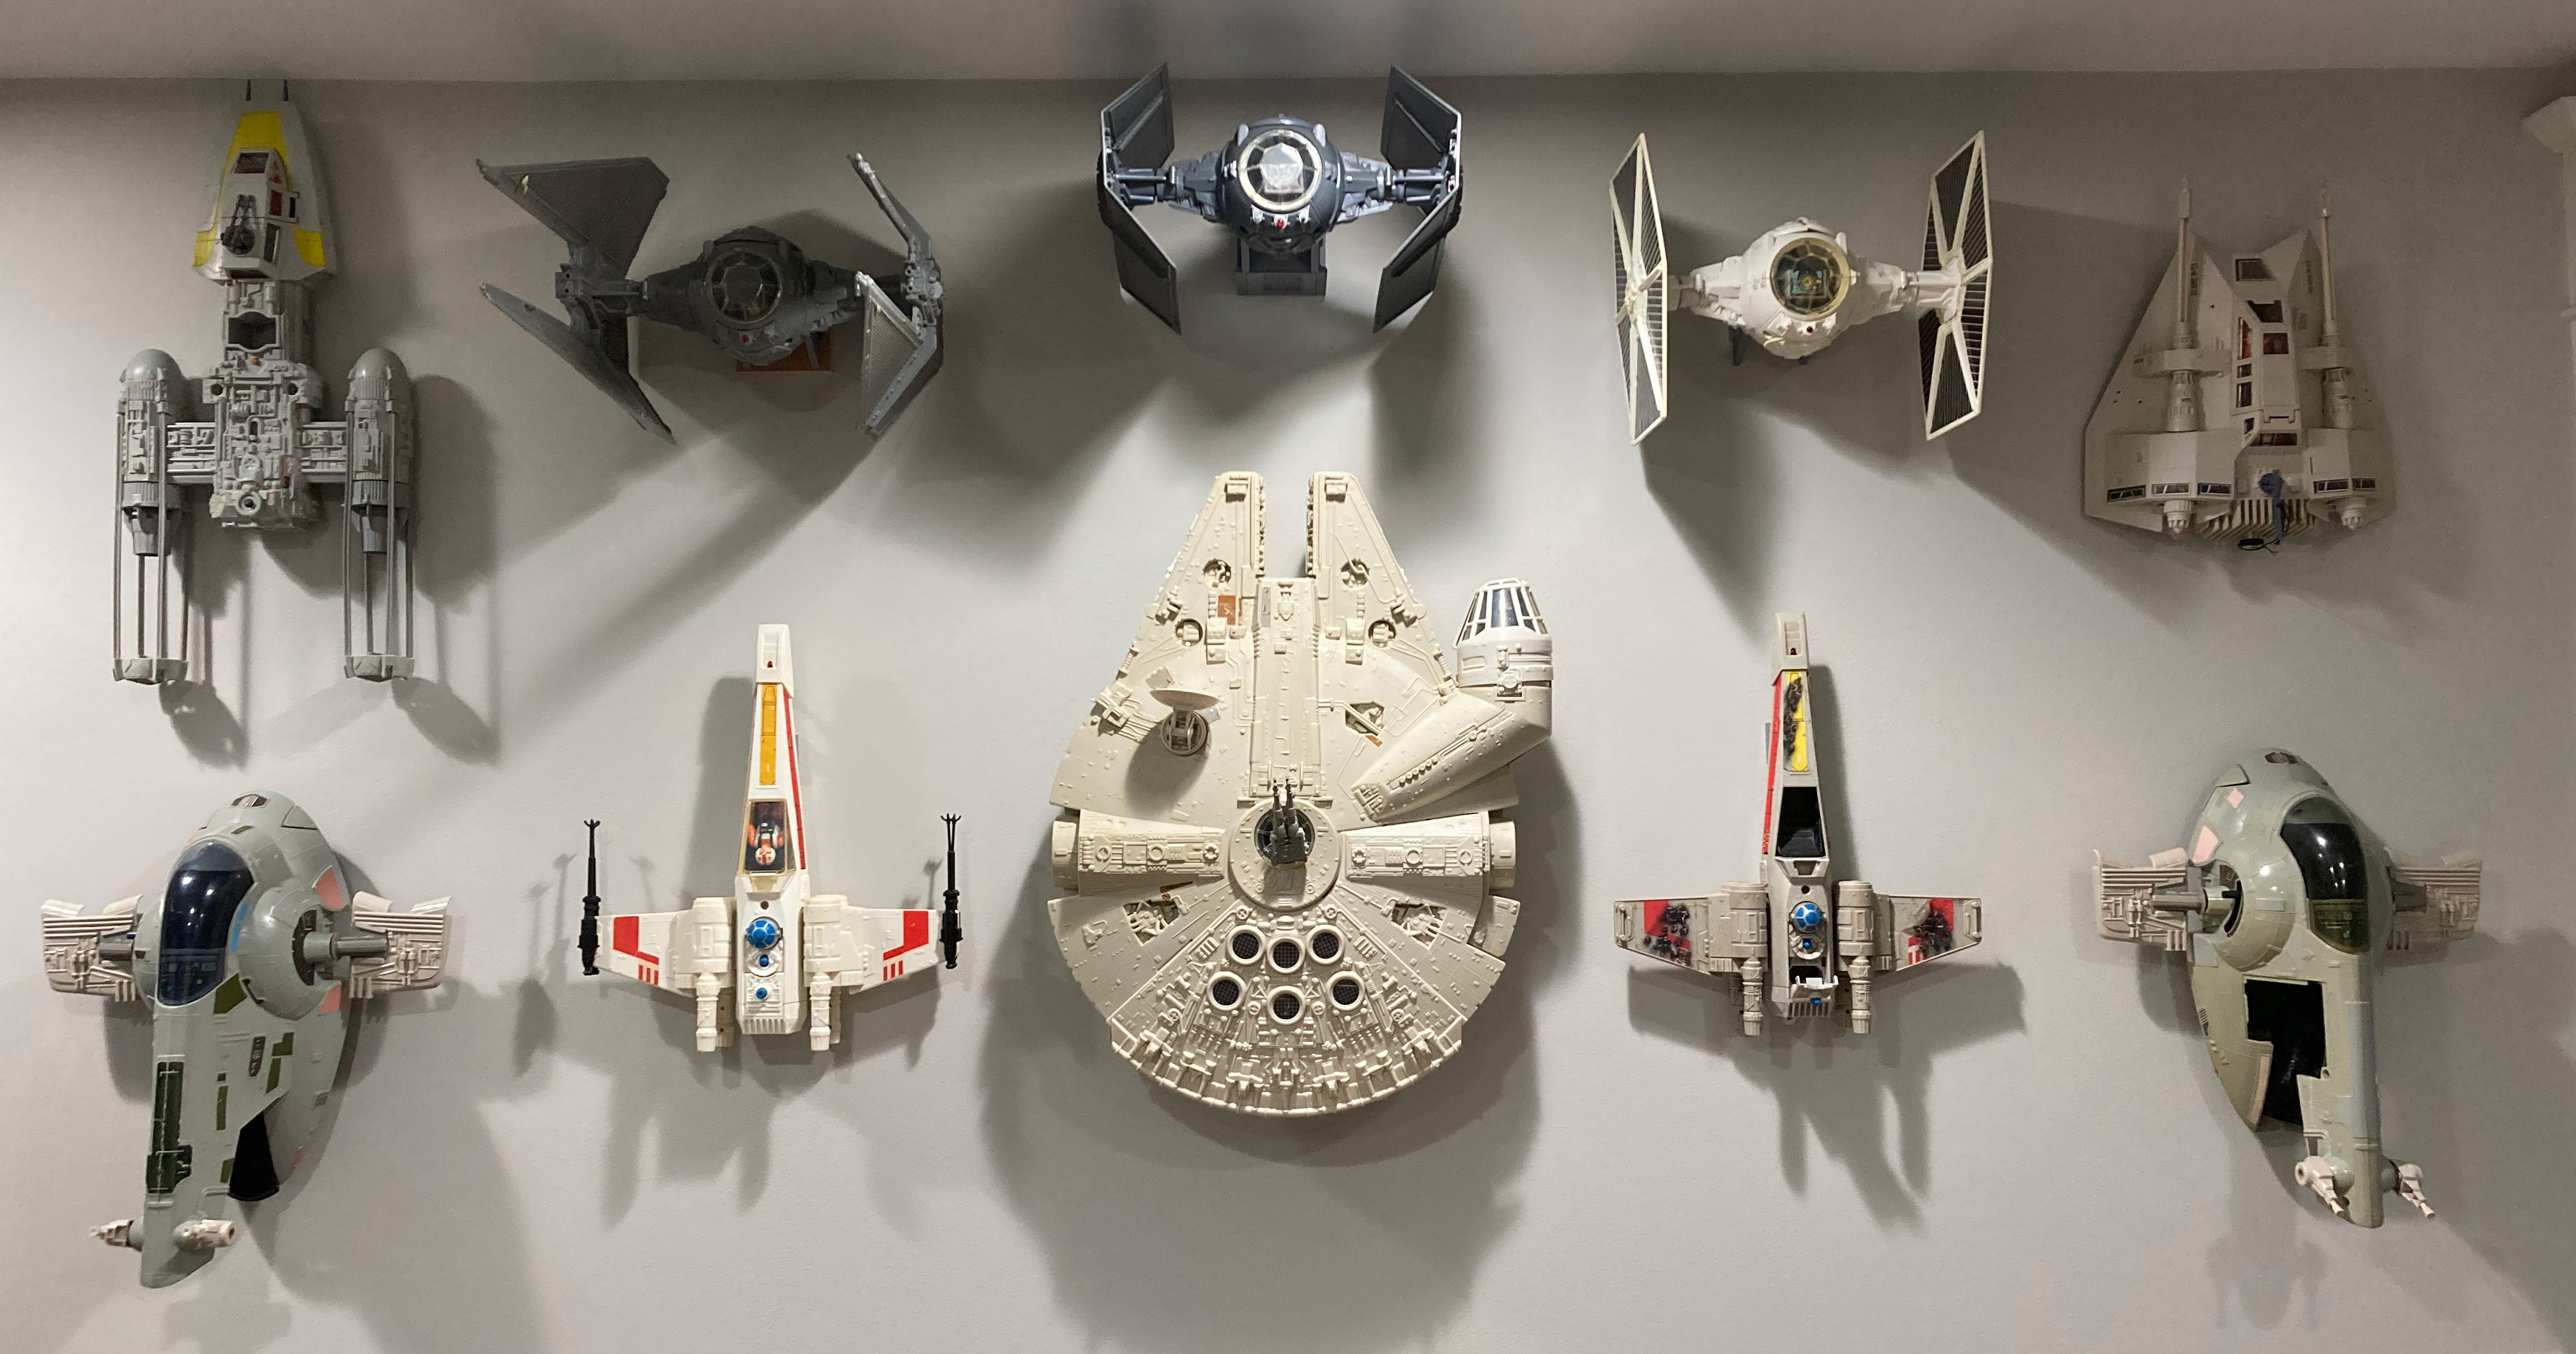 We have brackets so you can display your vintage Star Wars Y-Wing Fighter on the wall.